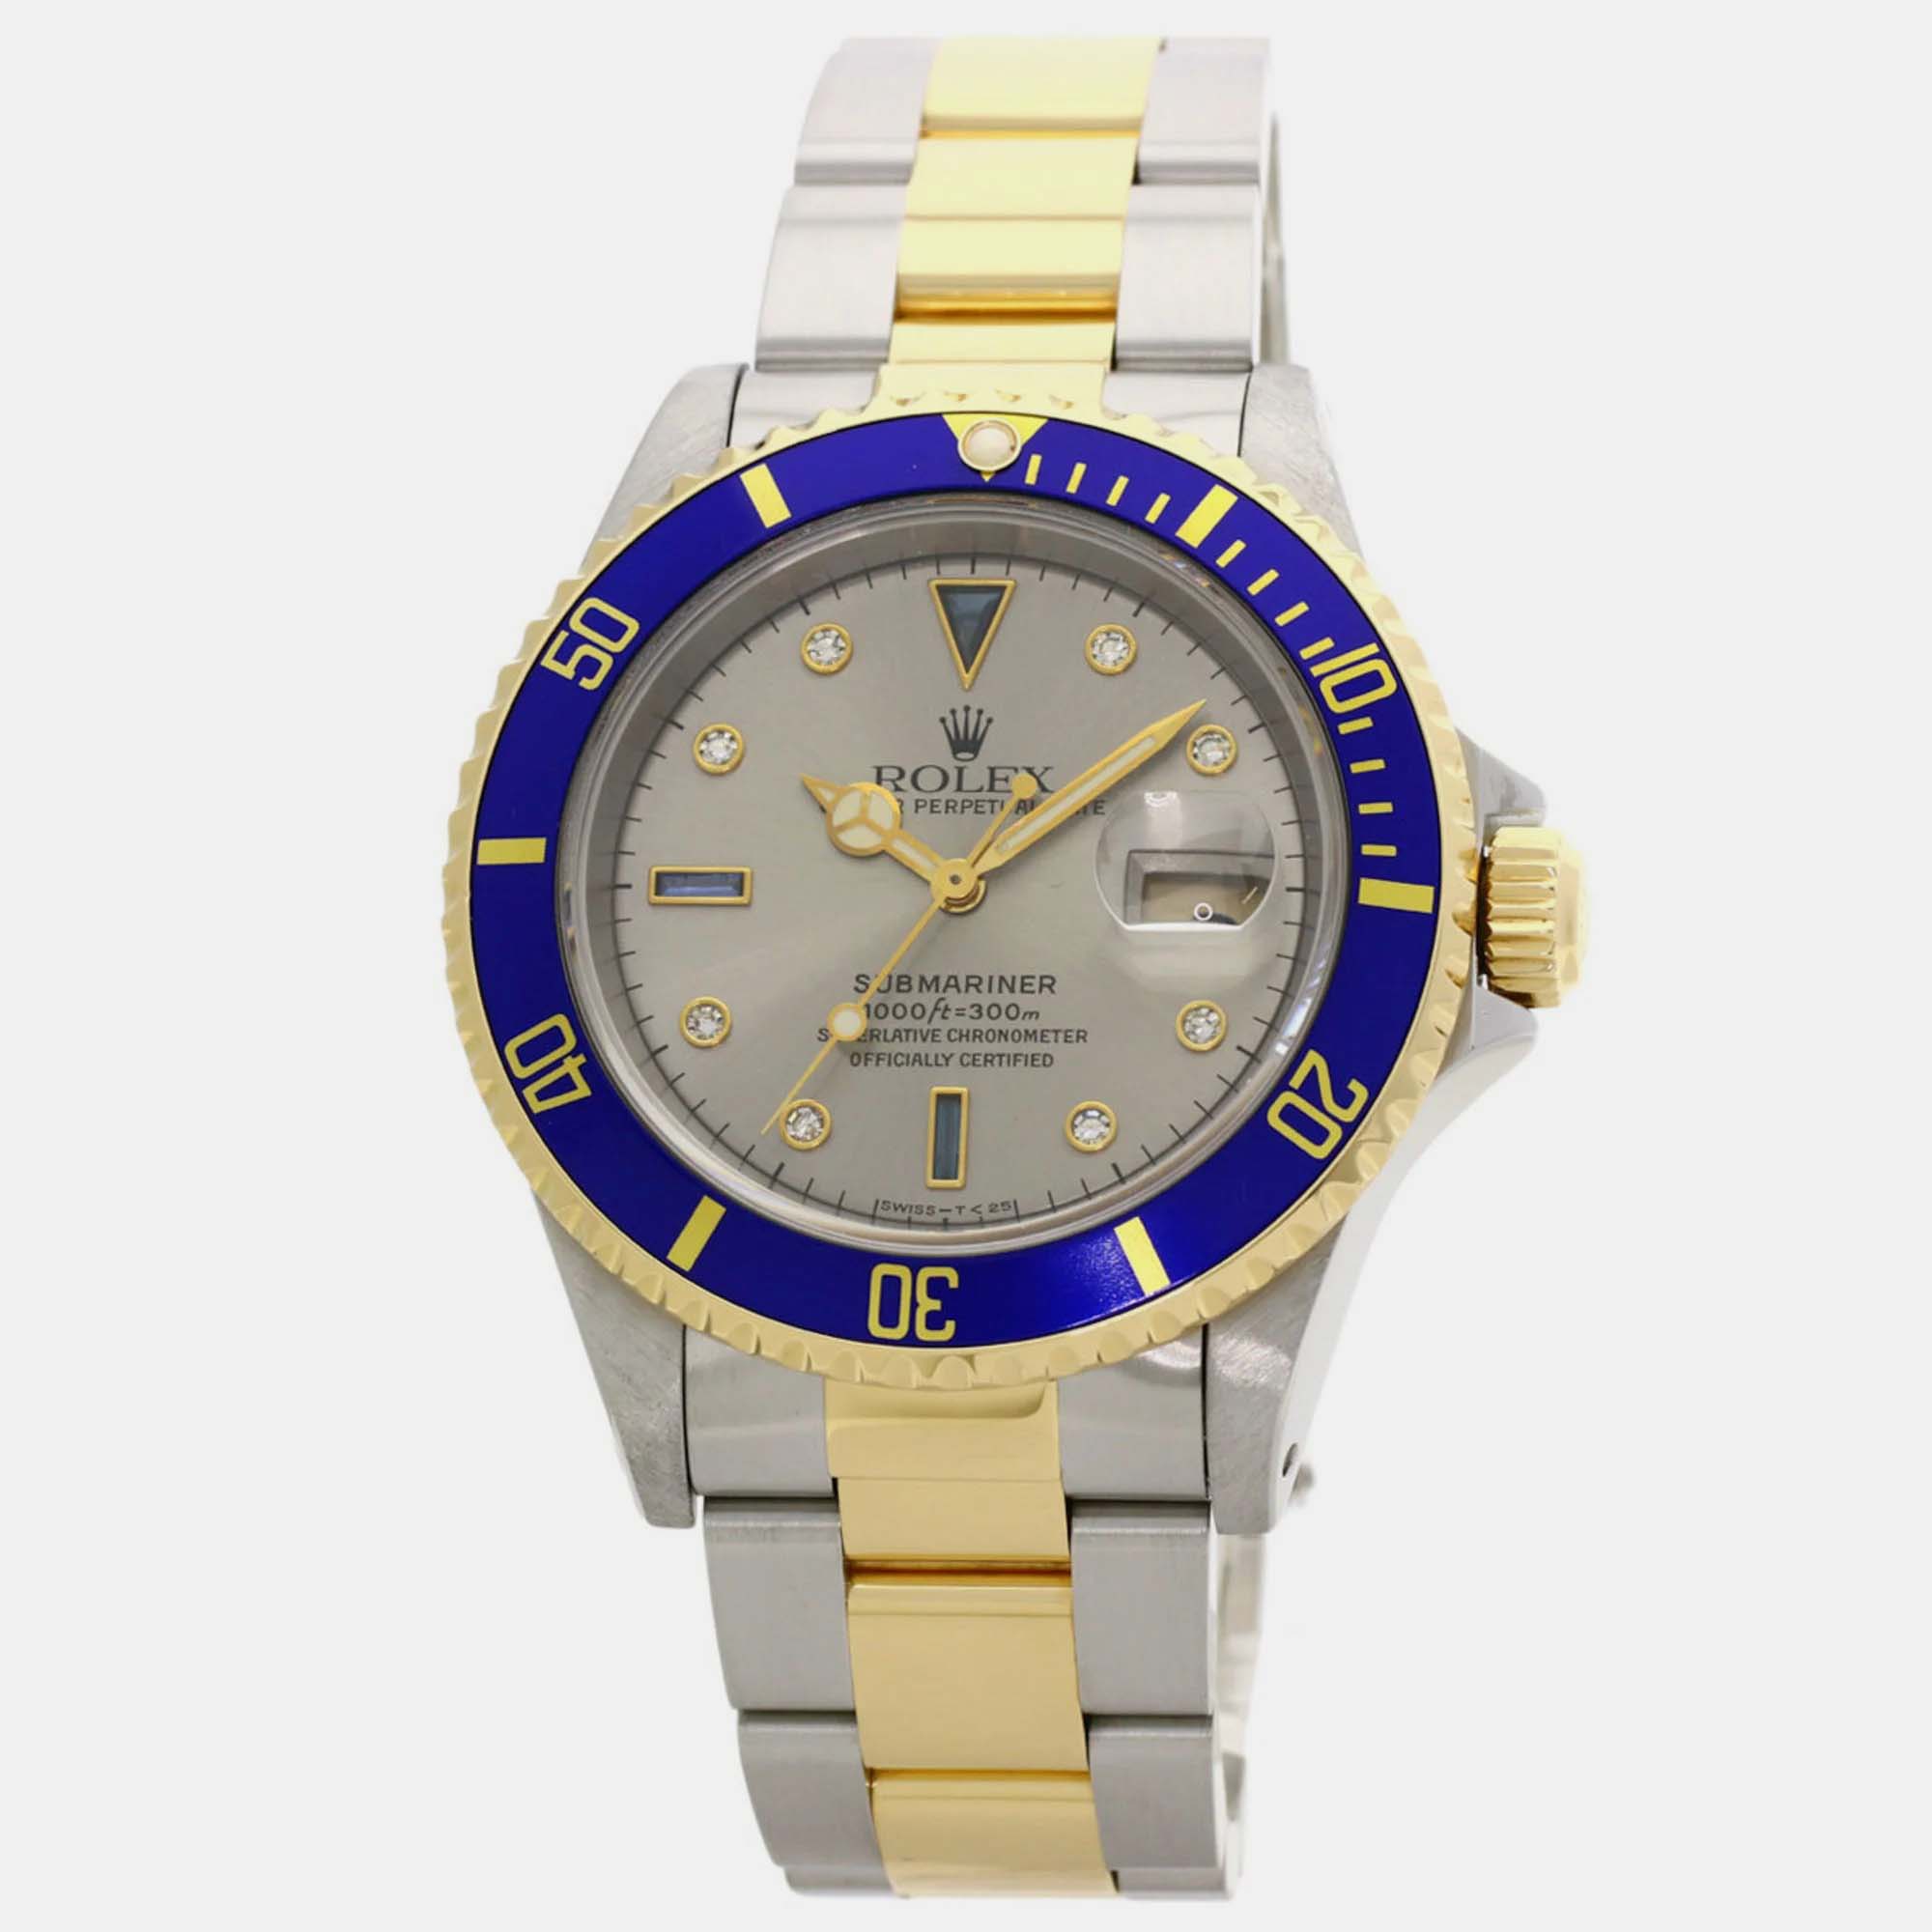 Rolex silver diamond 18k yellow gold and stainless steel submariner 16613sg automatic men's wristwatch 39 mm